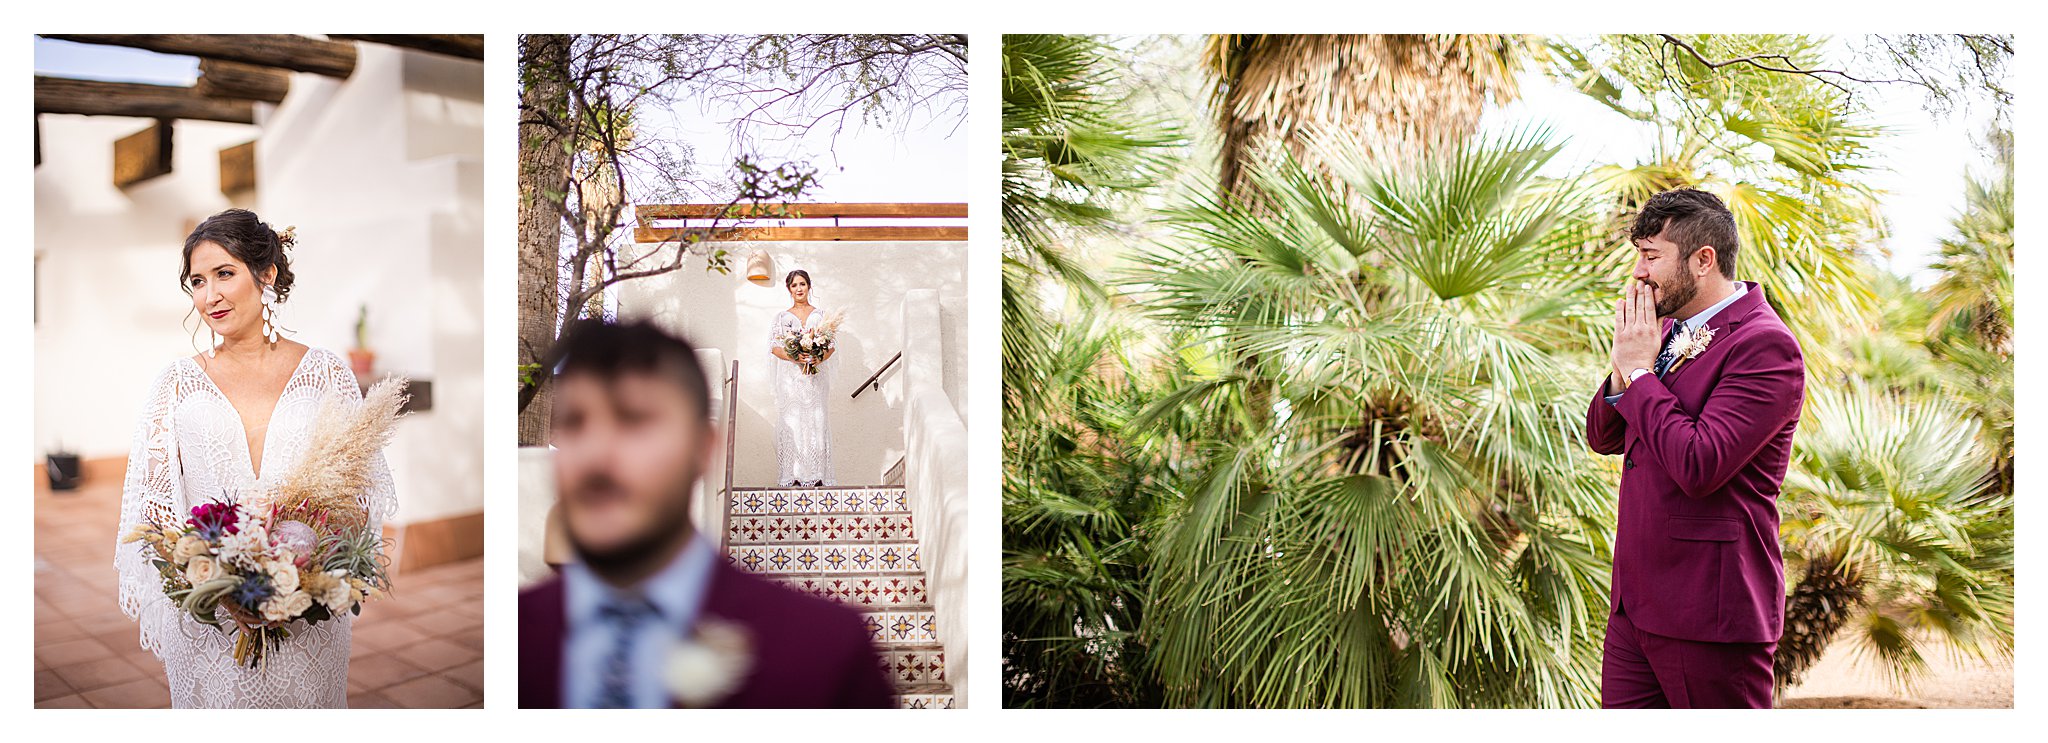 First Look at Posada Joshua Tree House in Tucson Arizona with groom in a maroon suit